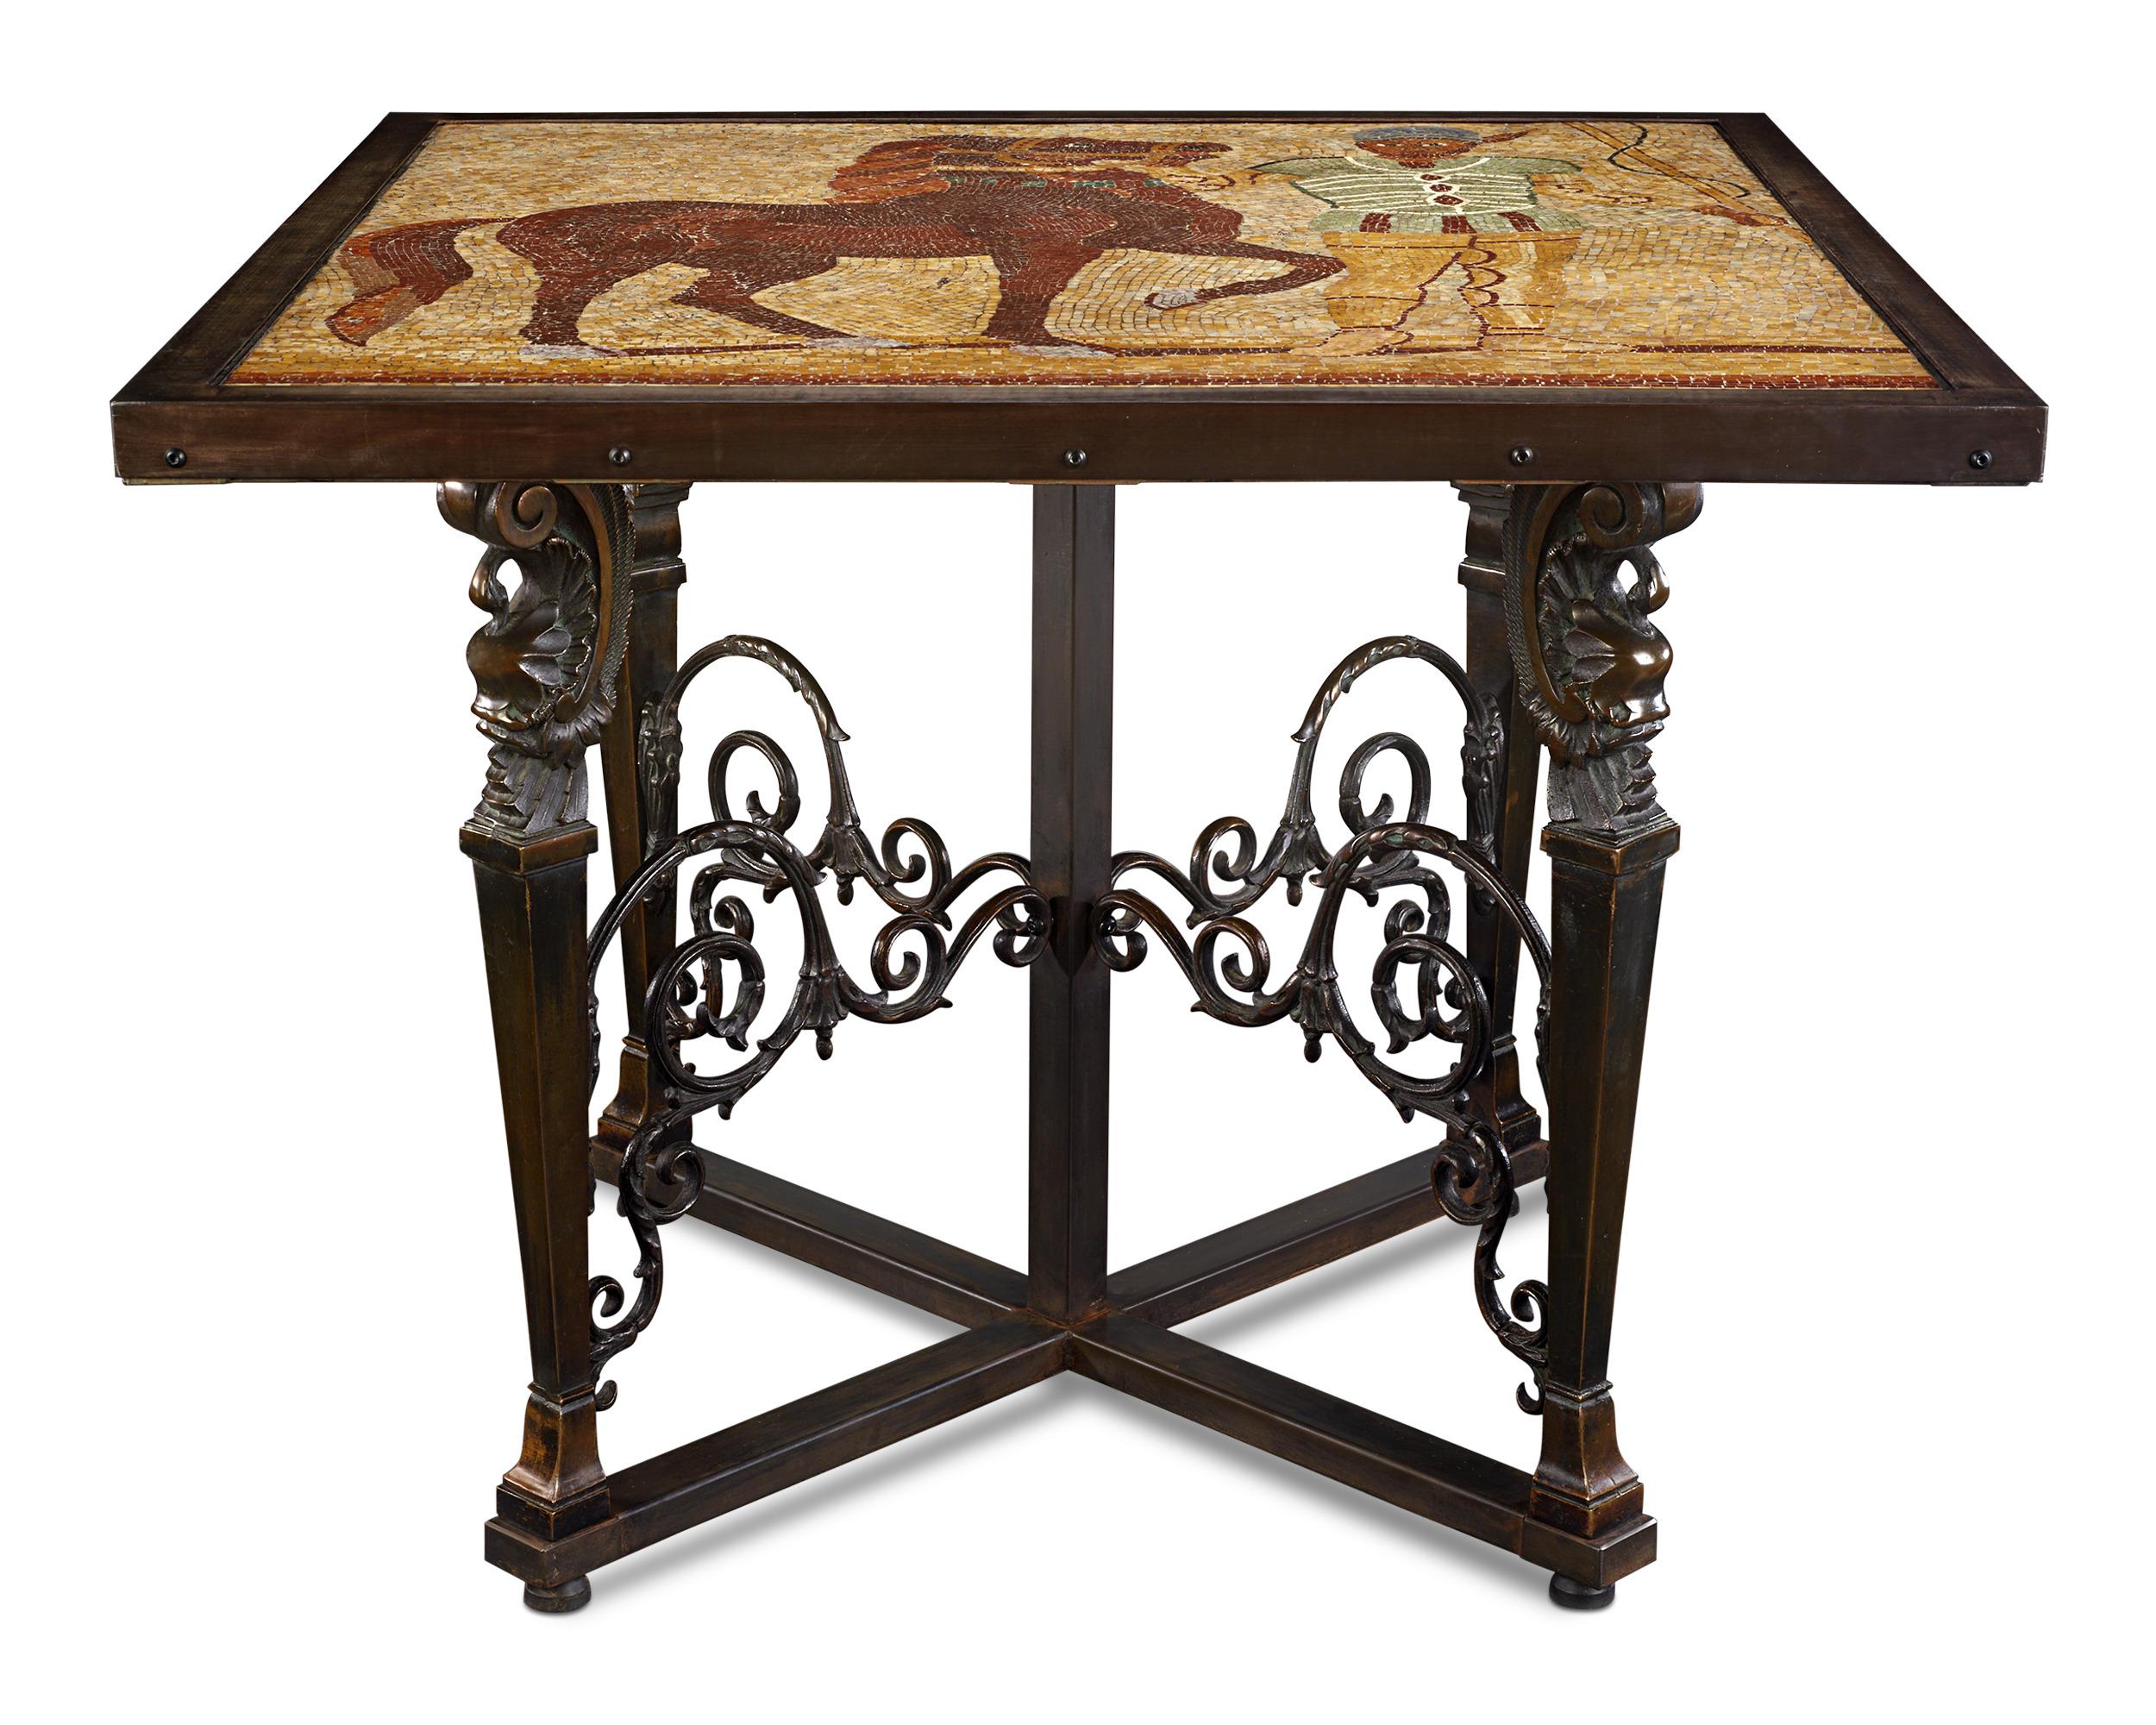 This Roman Empire mosaic table is an iconic example of Classical history, featuring a 3rd-century mosaic of a Roman Charioteer. More than mere entertainment, the four charioteer teams of the Roman Empire famously evoked passion, loyalty and fervor